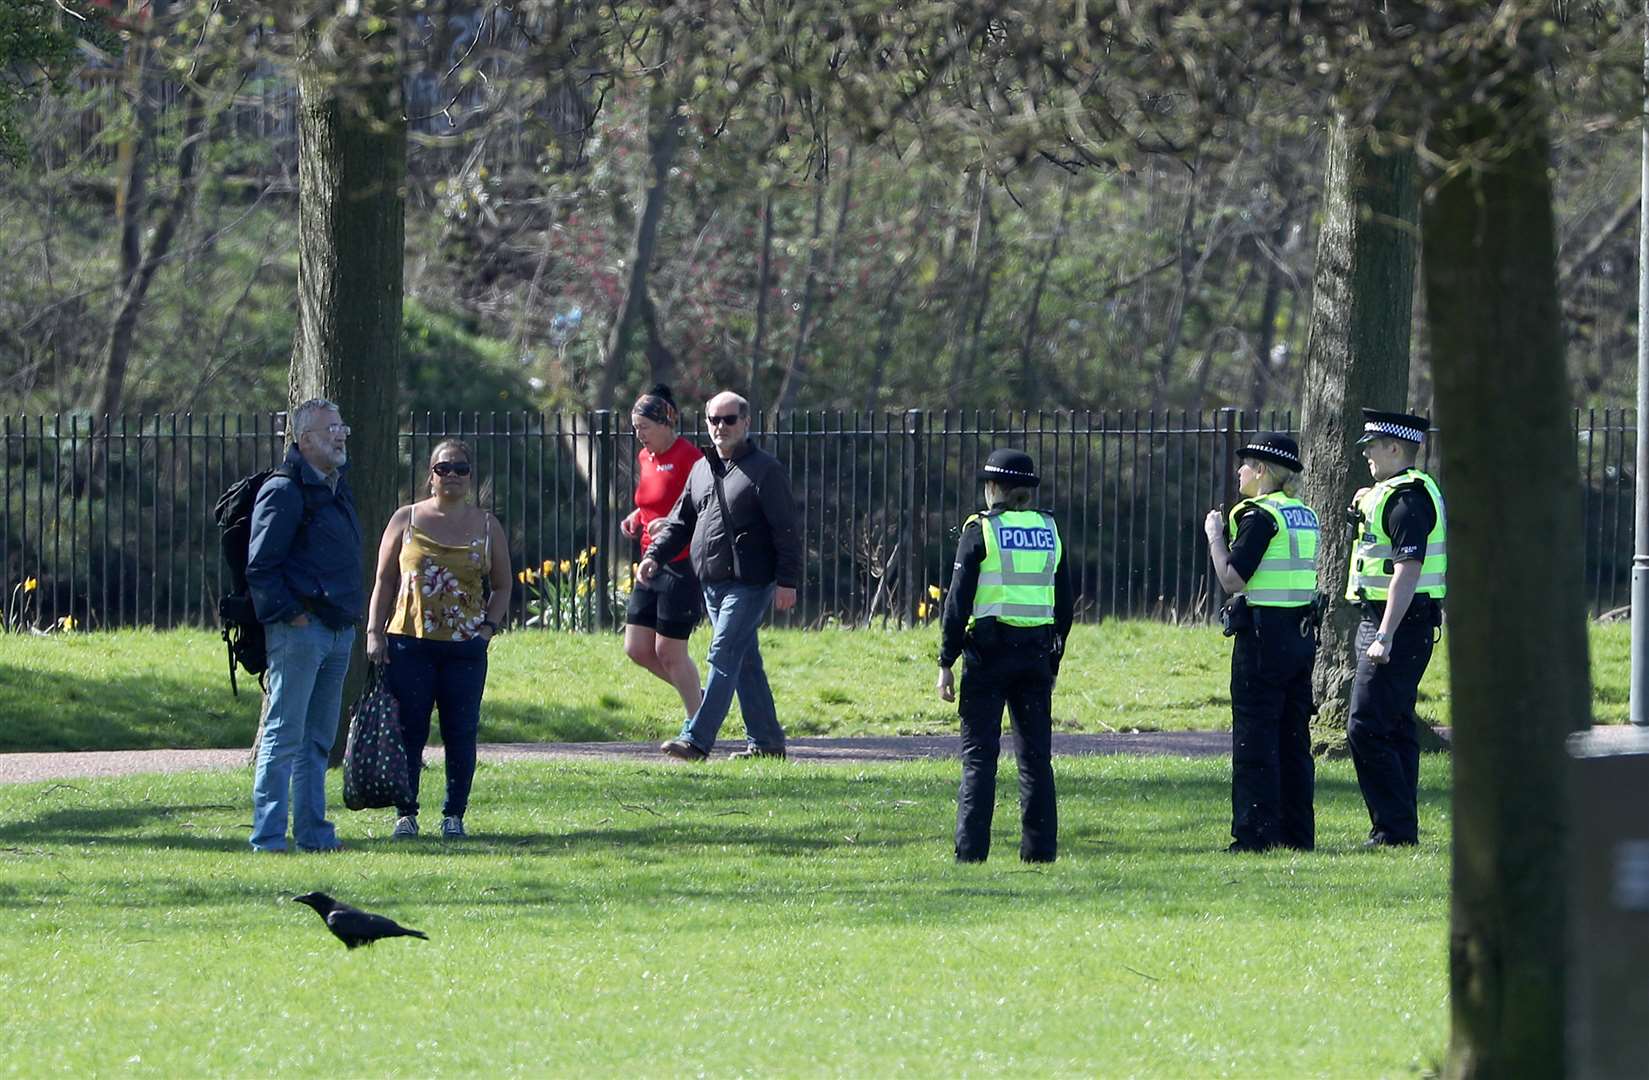 Police officers chat to park users in Glasgow Green (Andrew Milligan/PA)